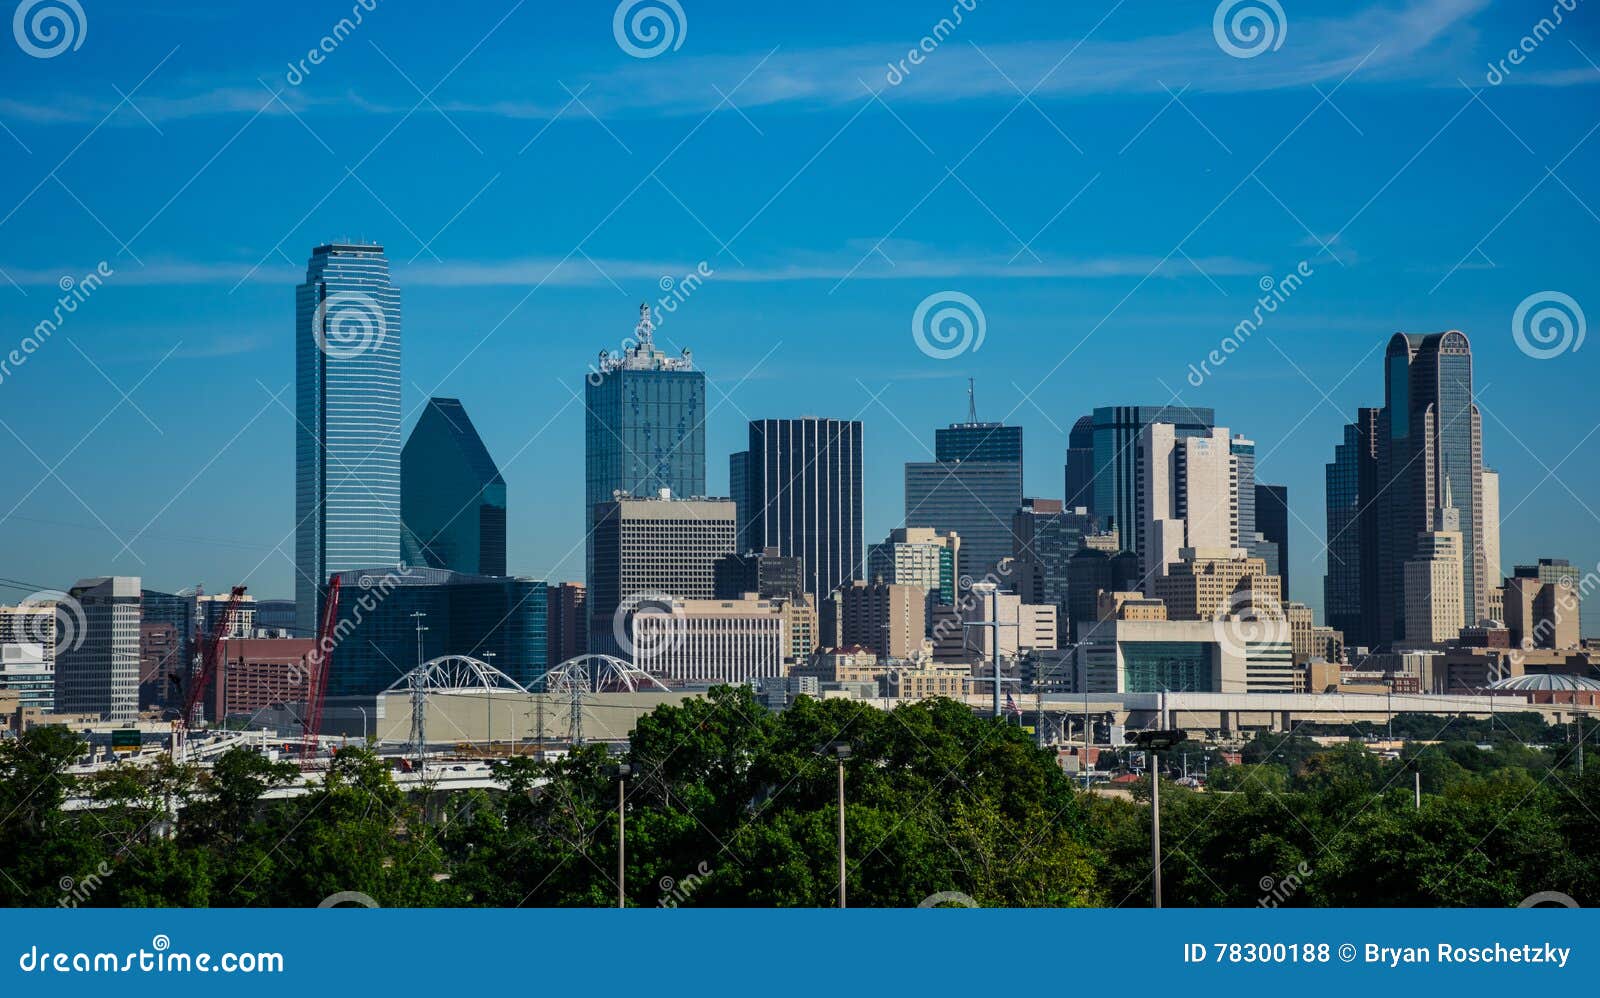 dallas texas downtown metropolis skyline cityscape with highrises and office buildings on nice sunny day